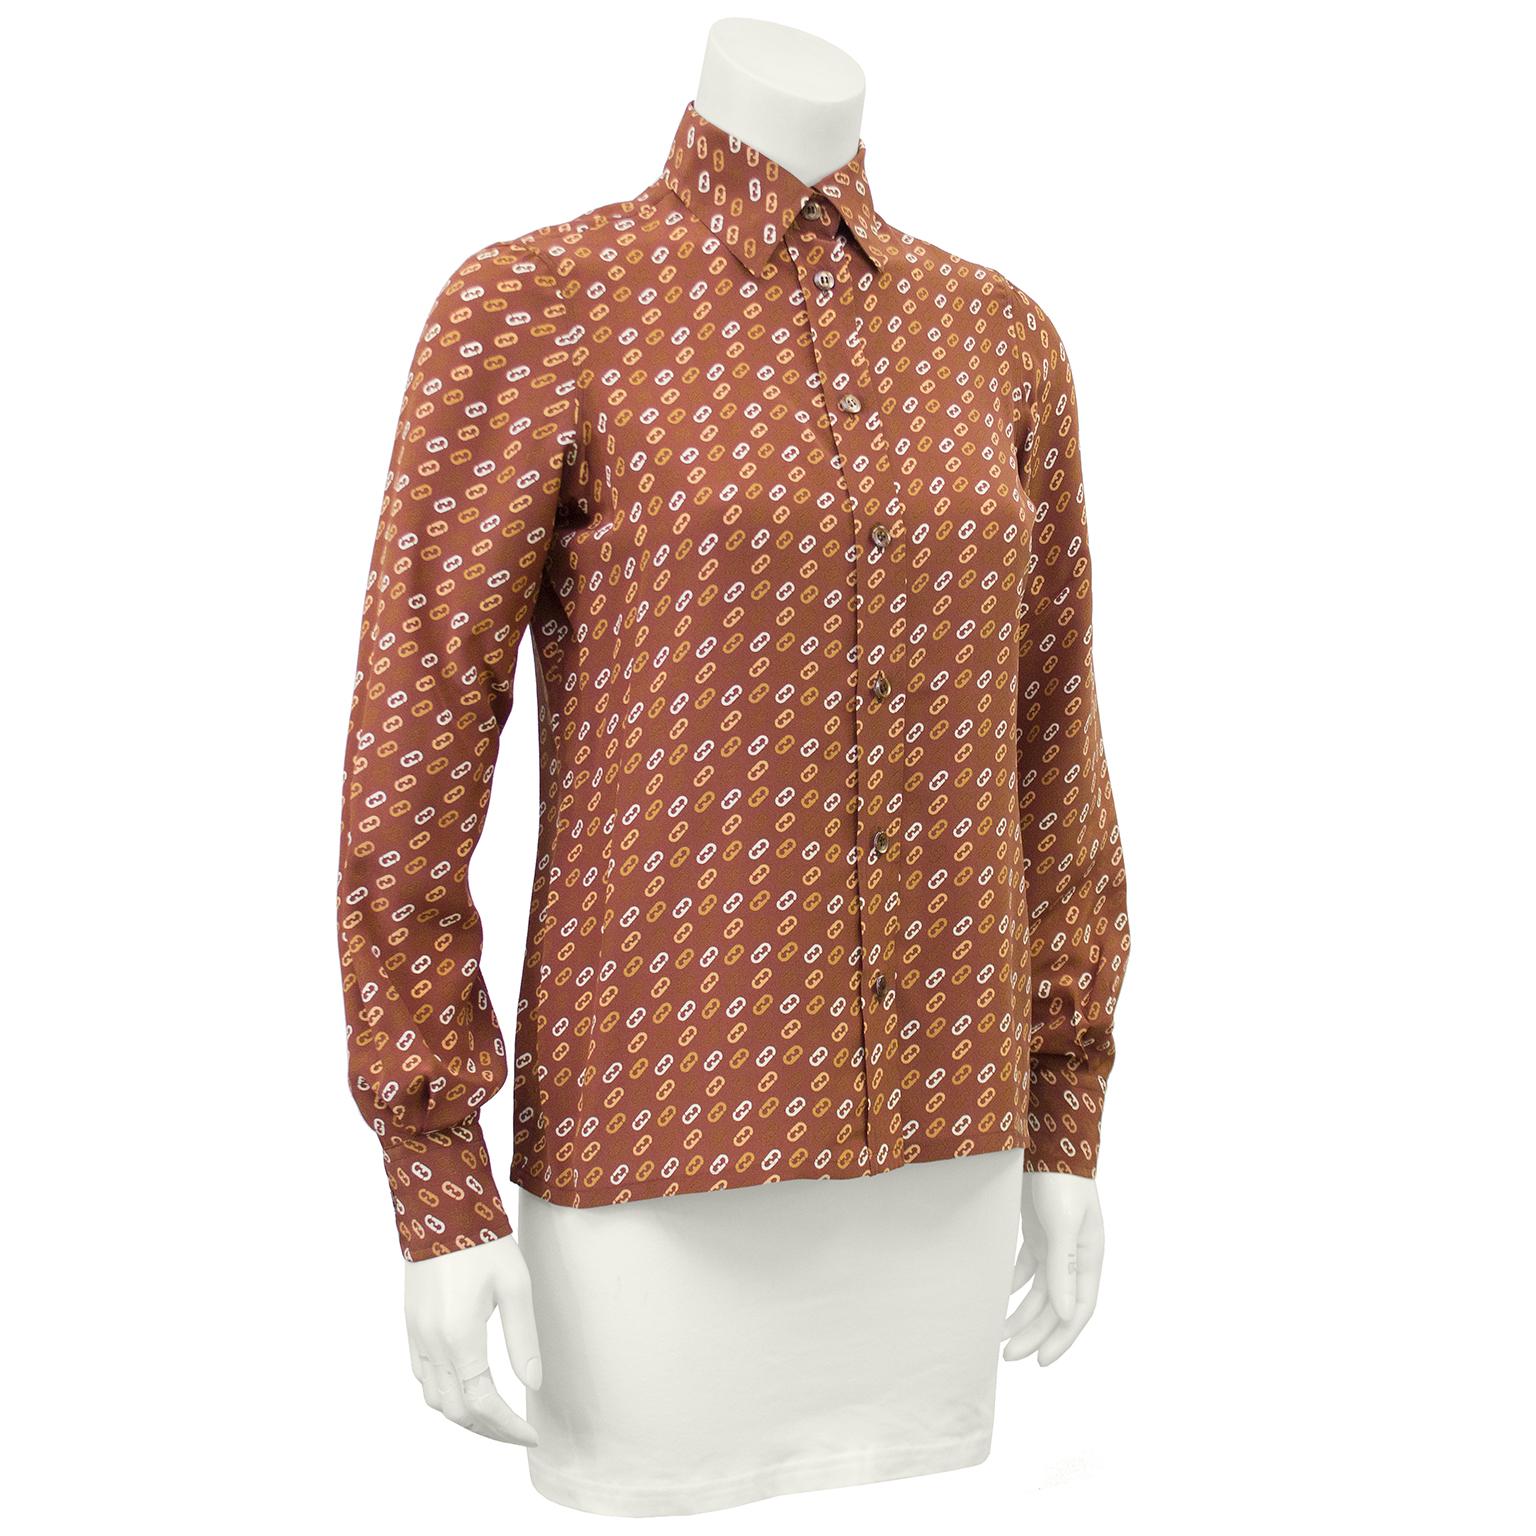 Beautiful 1980s Ferragamo tan silk blouse with an all over print of tan, brown, cream and beige FF link Ferragamo logos. Free of any stains or holes, the blouse fastens up the front with small plastic brown buttons. and buttoned cuffs. In excellent